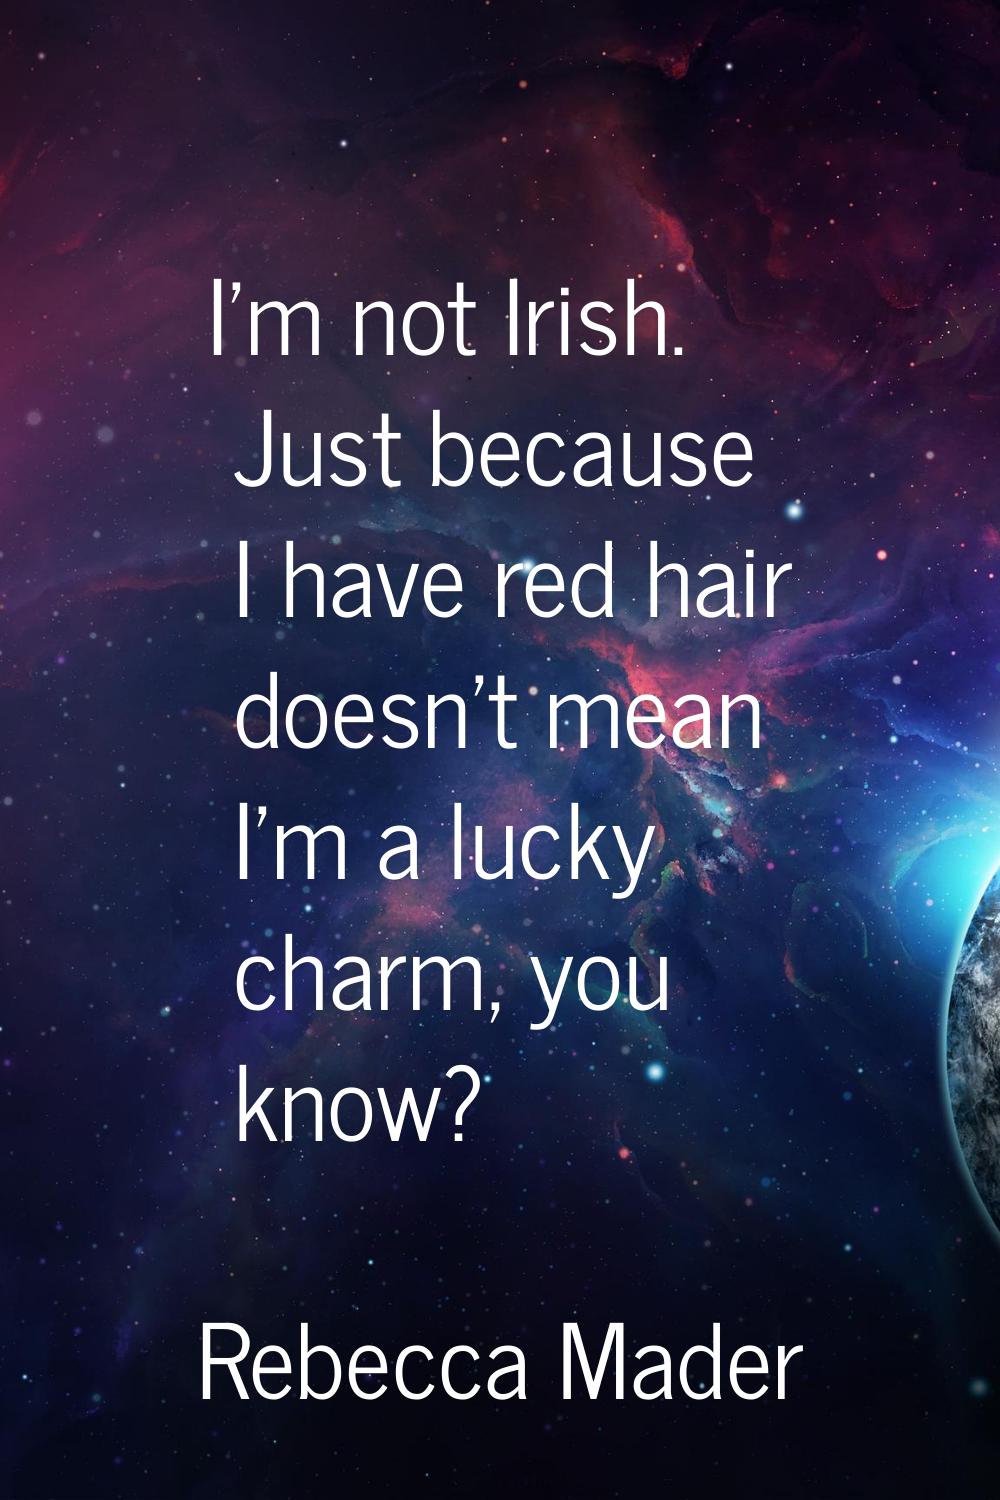 I'm not Irish. Just because I have red hair doesn't mean I'm a lucky charm, you know?